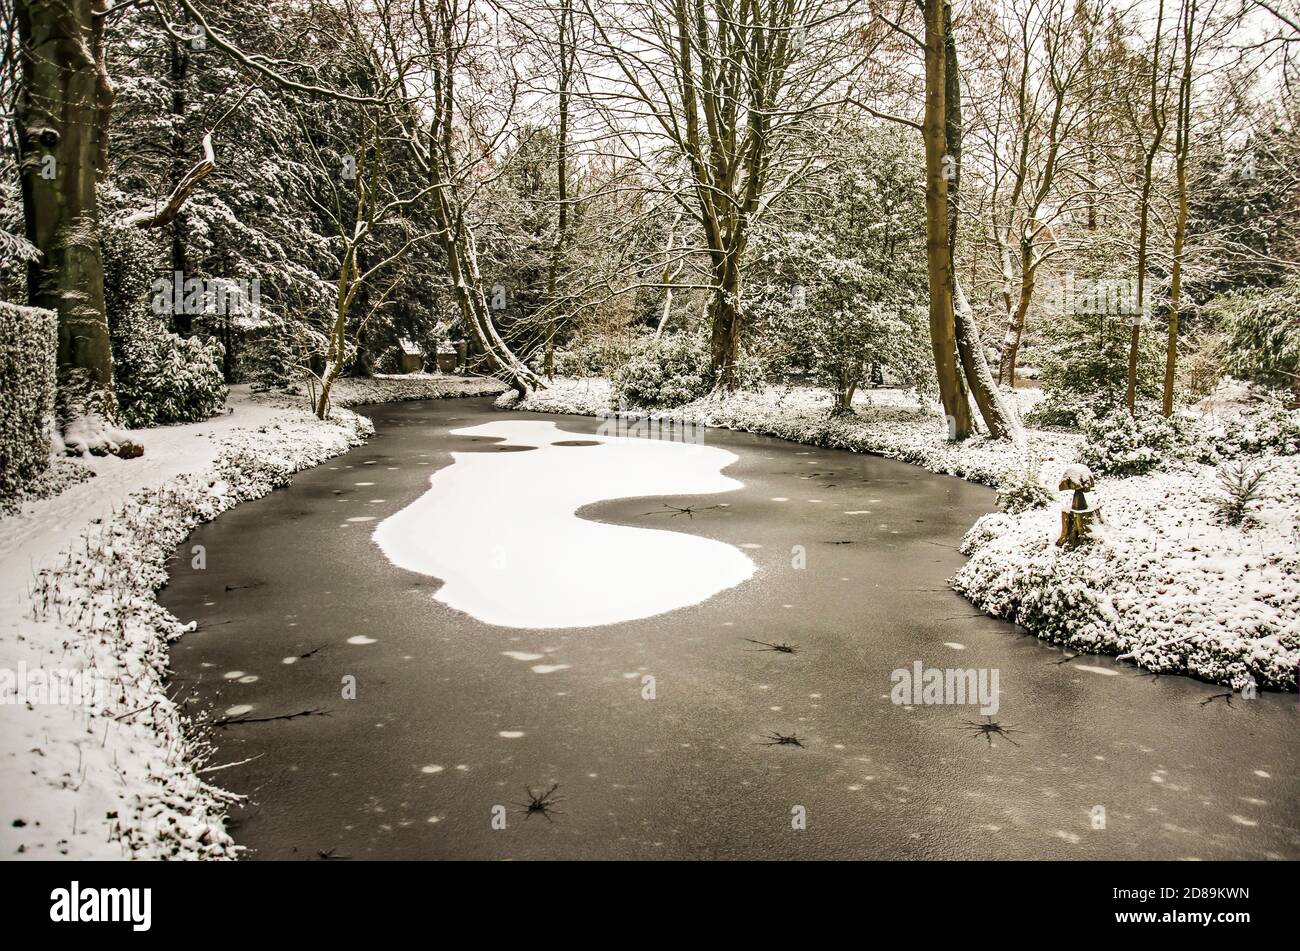 Rotterdam, The Netherlands, January 22, 2020: pond in Schoonoord Park on a winter day, covered with ice, snow and slush Stock Photo